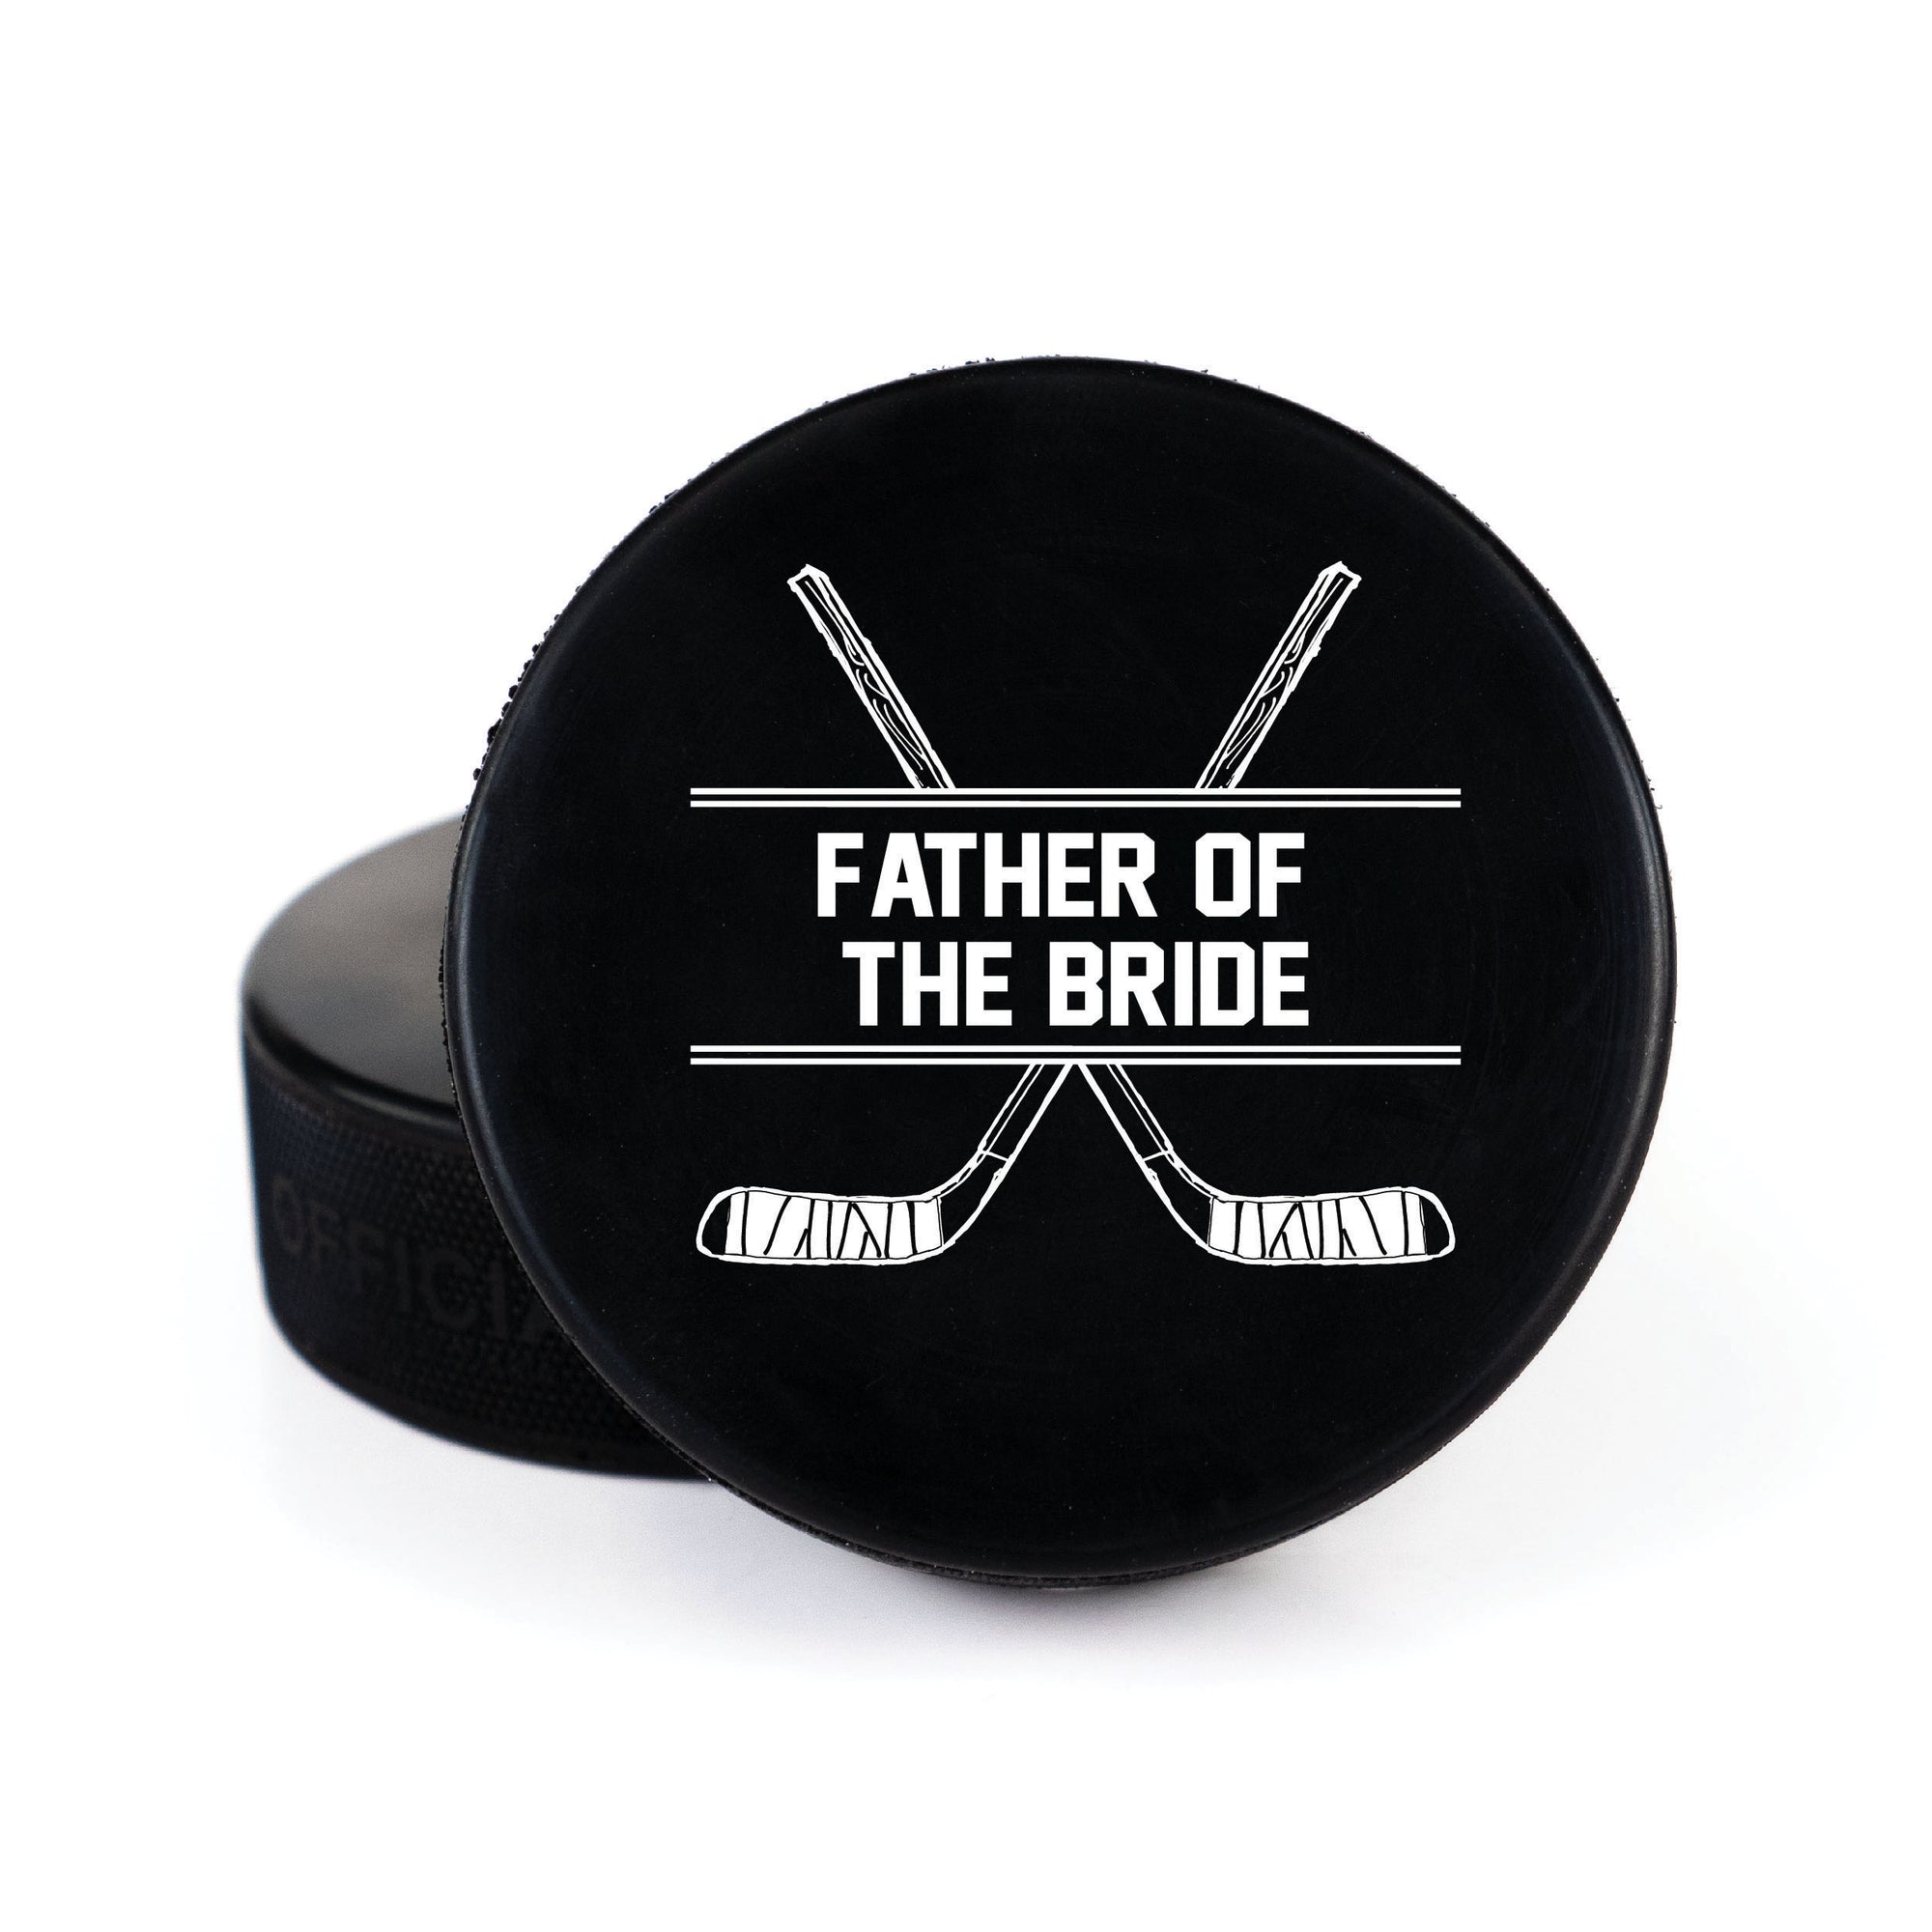 Printed Hockey Puck with Father of the Bride Design